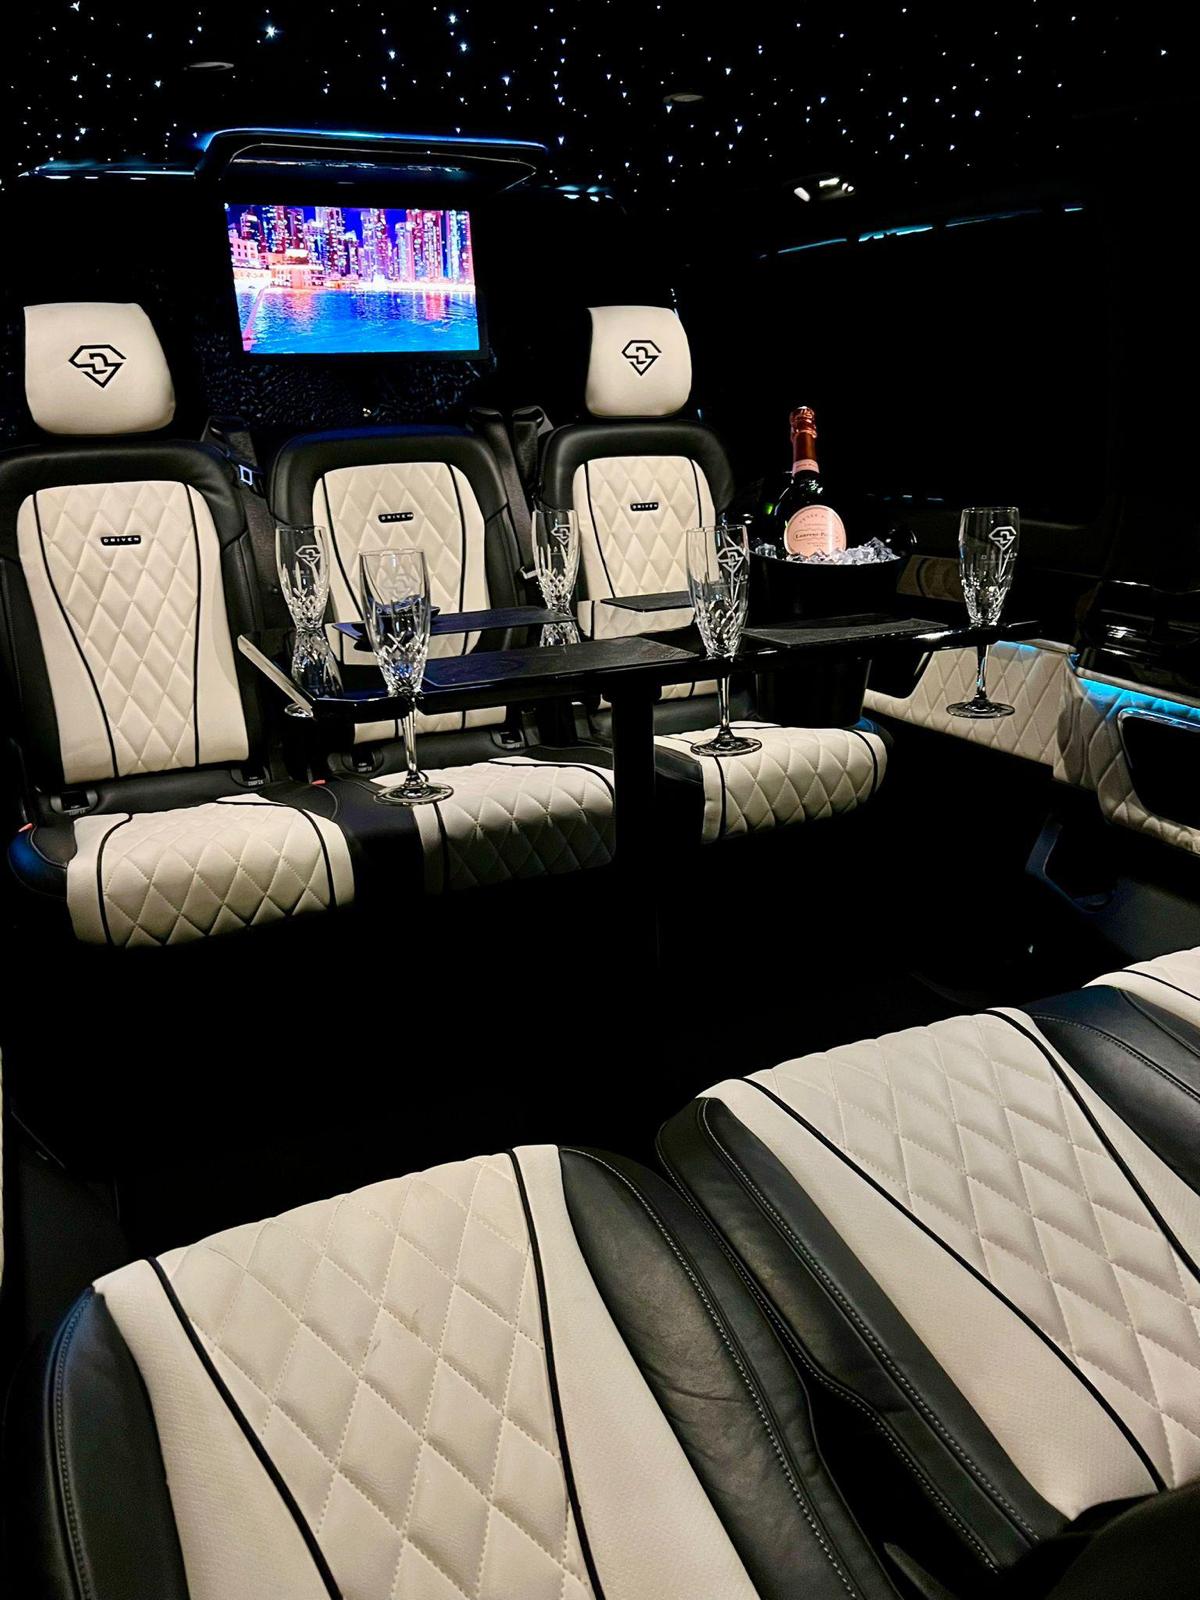 Discover the Luxury Features of the Mercedes V-Class for Your Next Greater London Journey